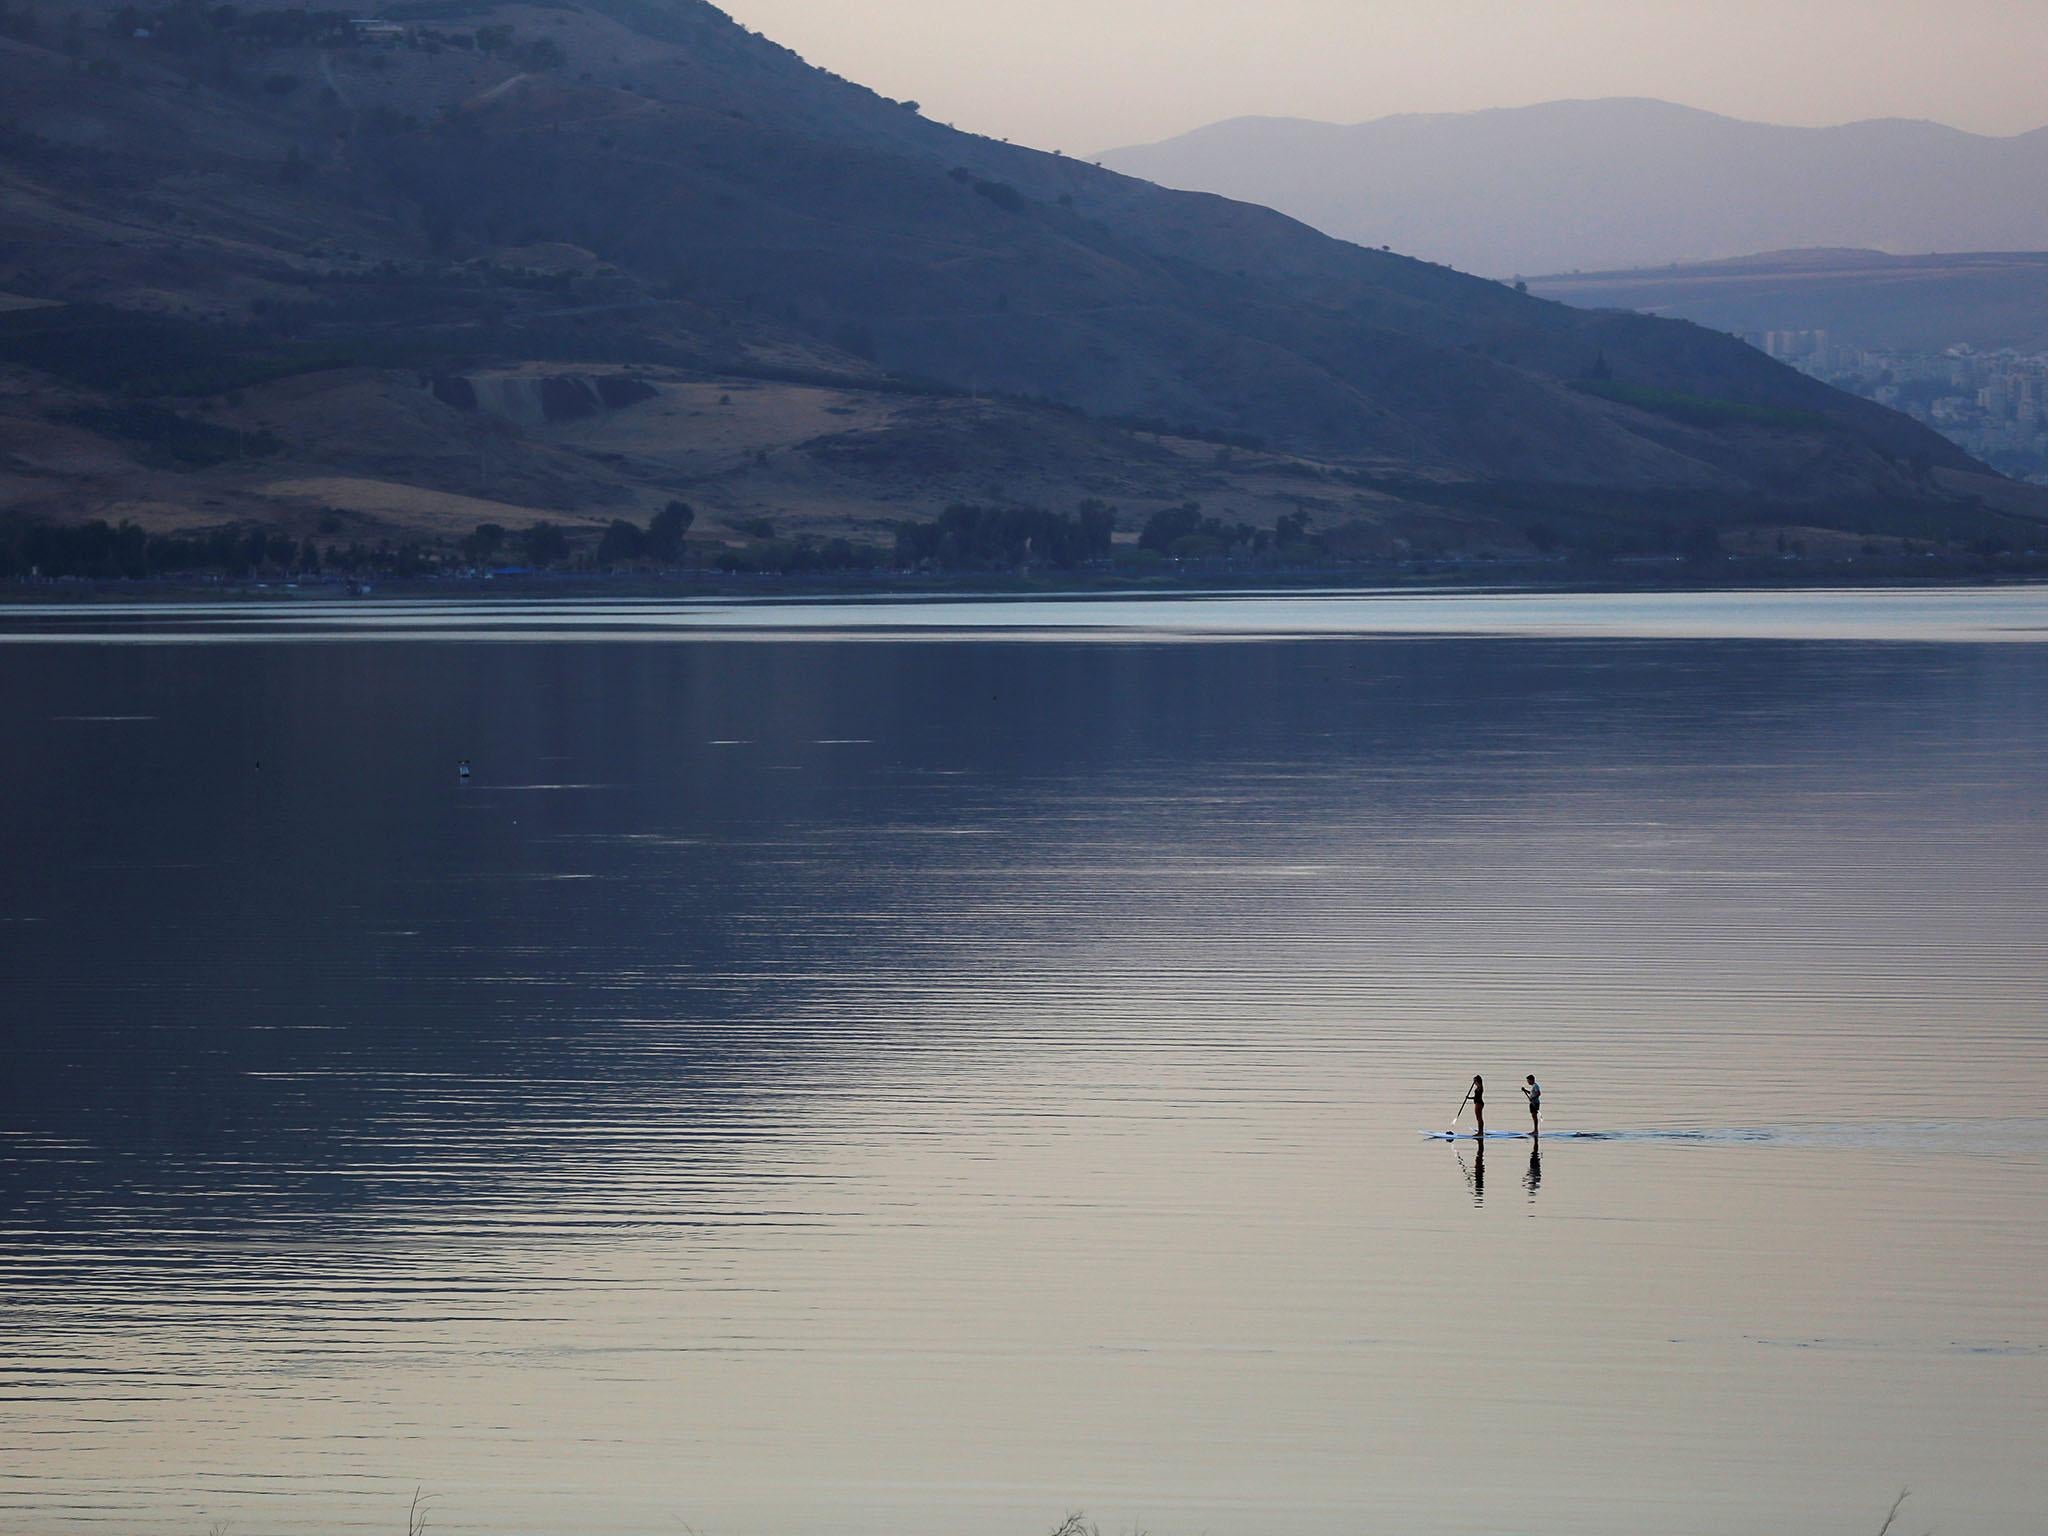 People paddle on a stand-up paddle board in the Sea of Galilee, northern Israel